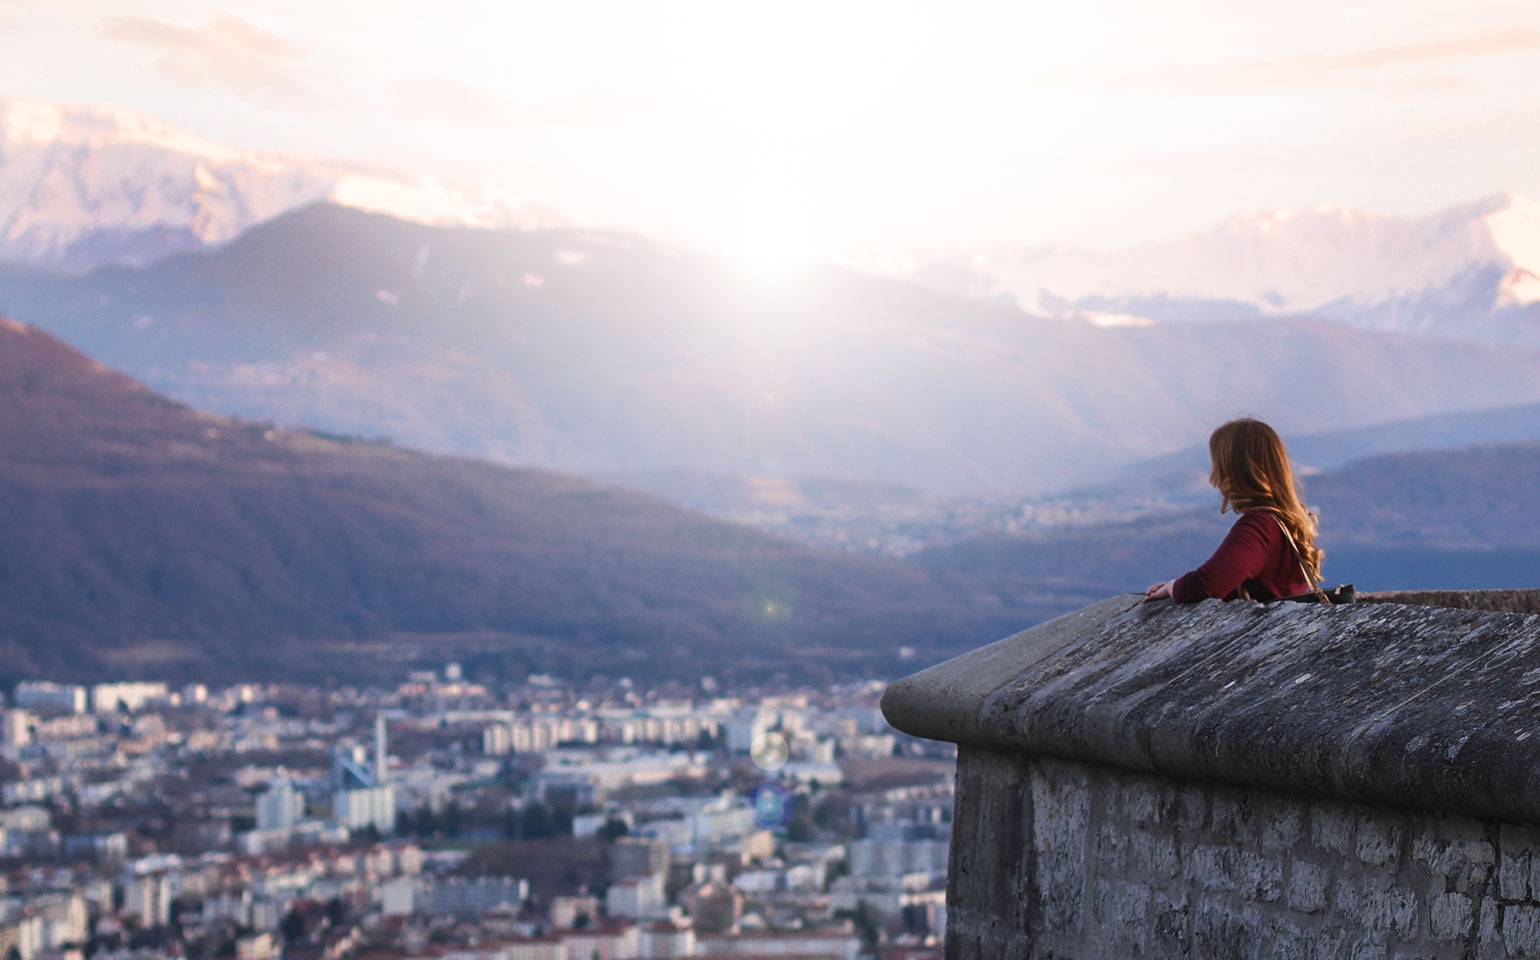 A picture of a person sitting on a ledge overlooking a town and some mountains.